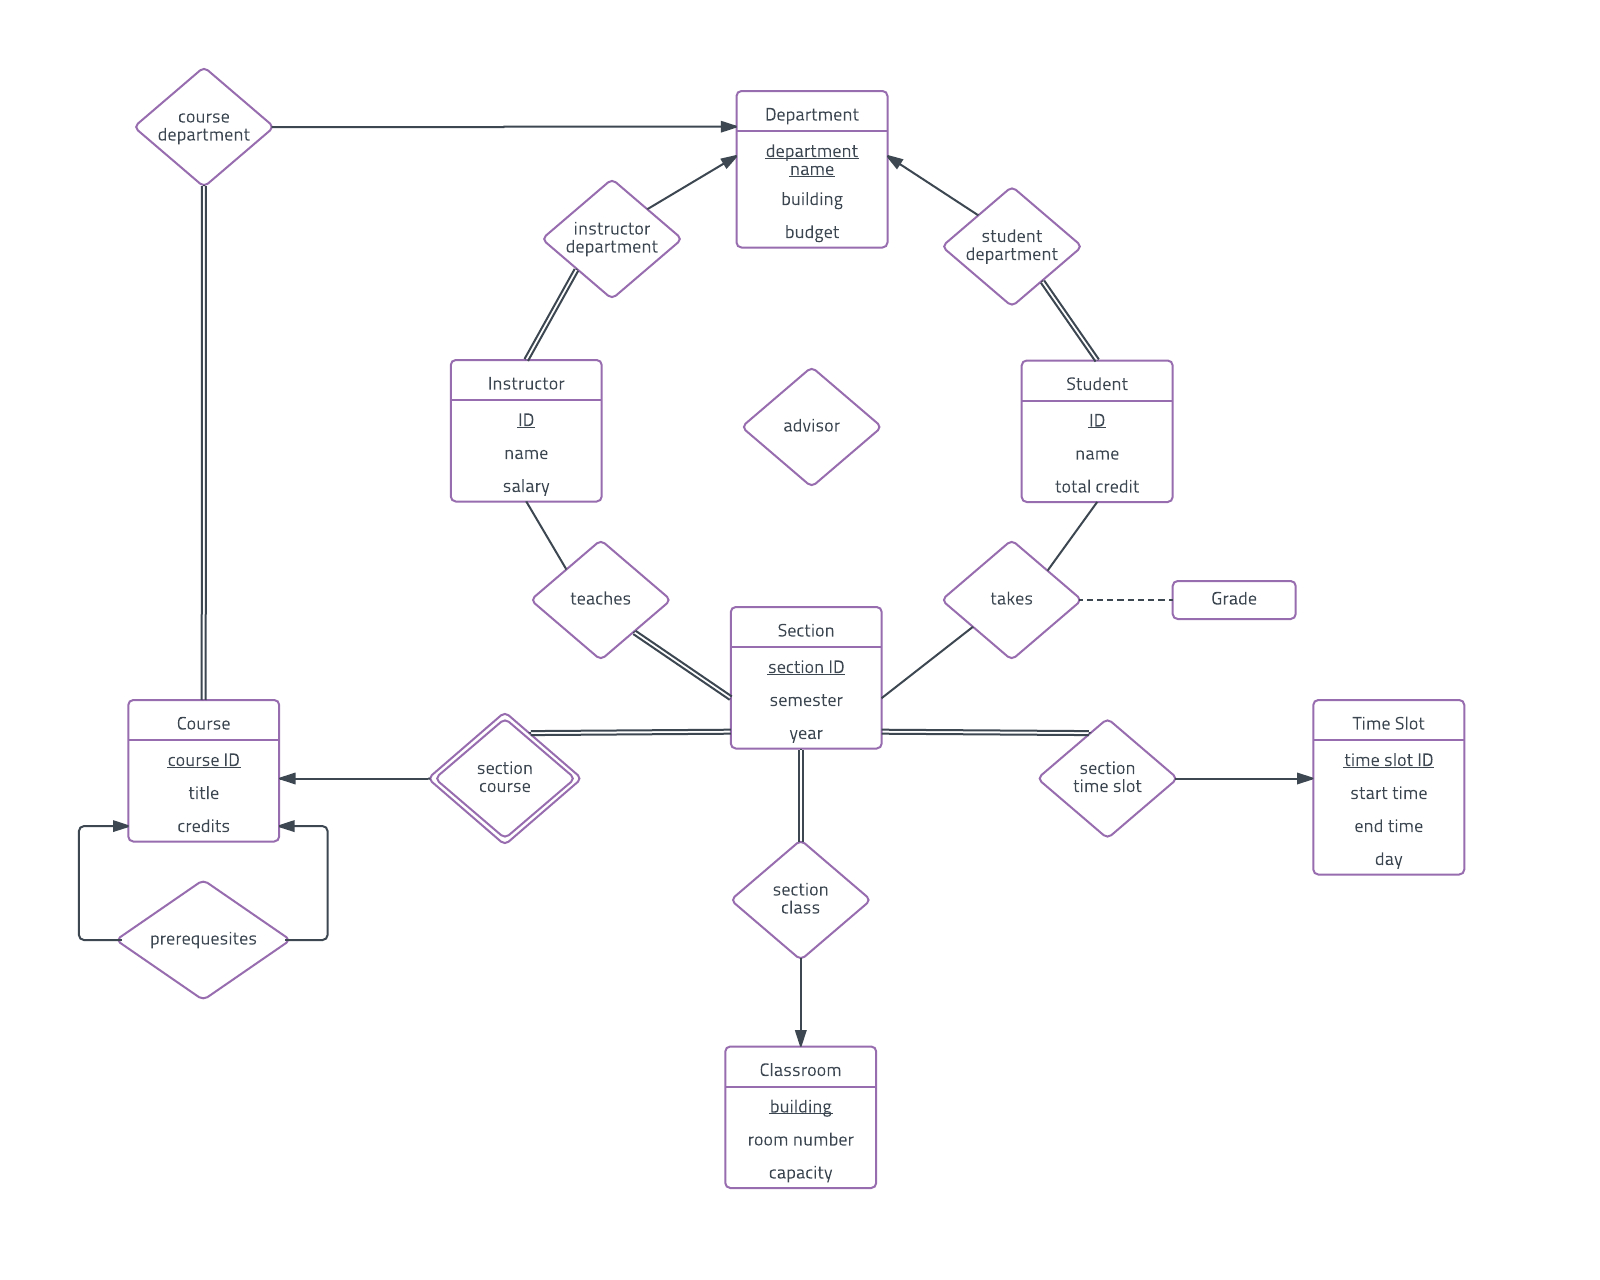 Er Diagram Examples And Templates | Lucidchart throughout Er Diagram Examples With Solutions